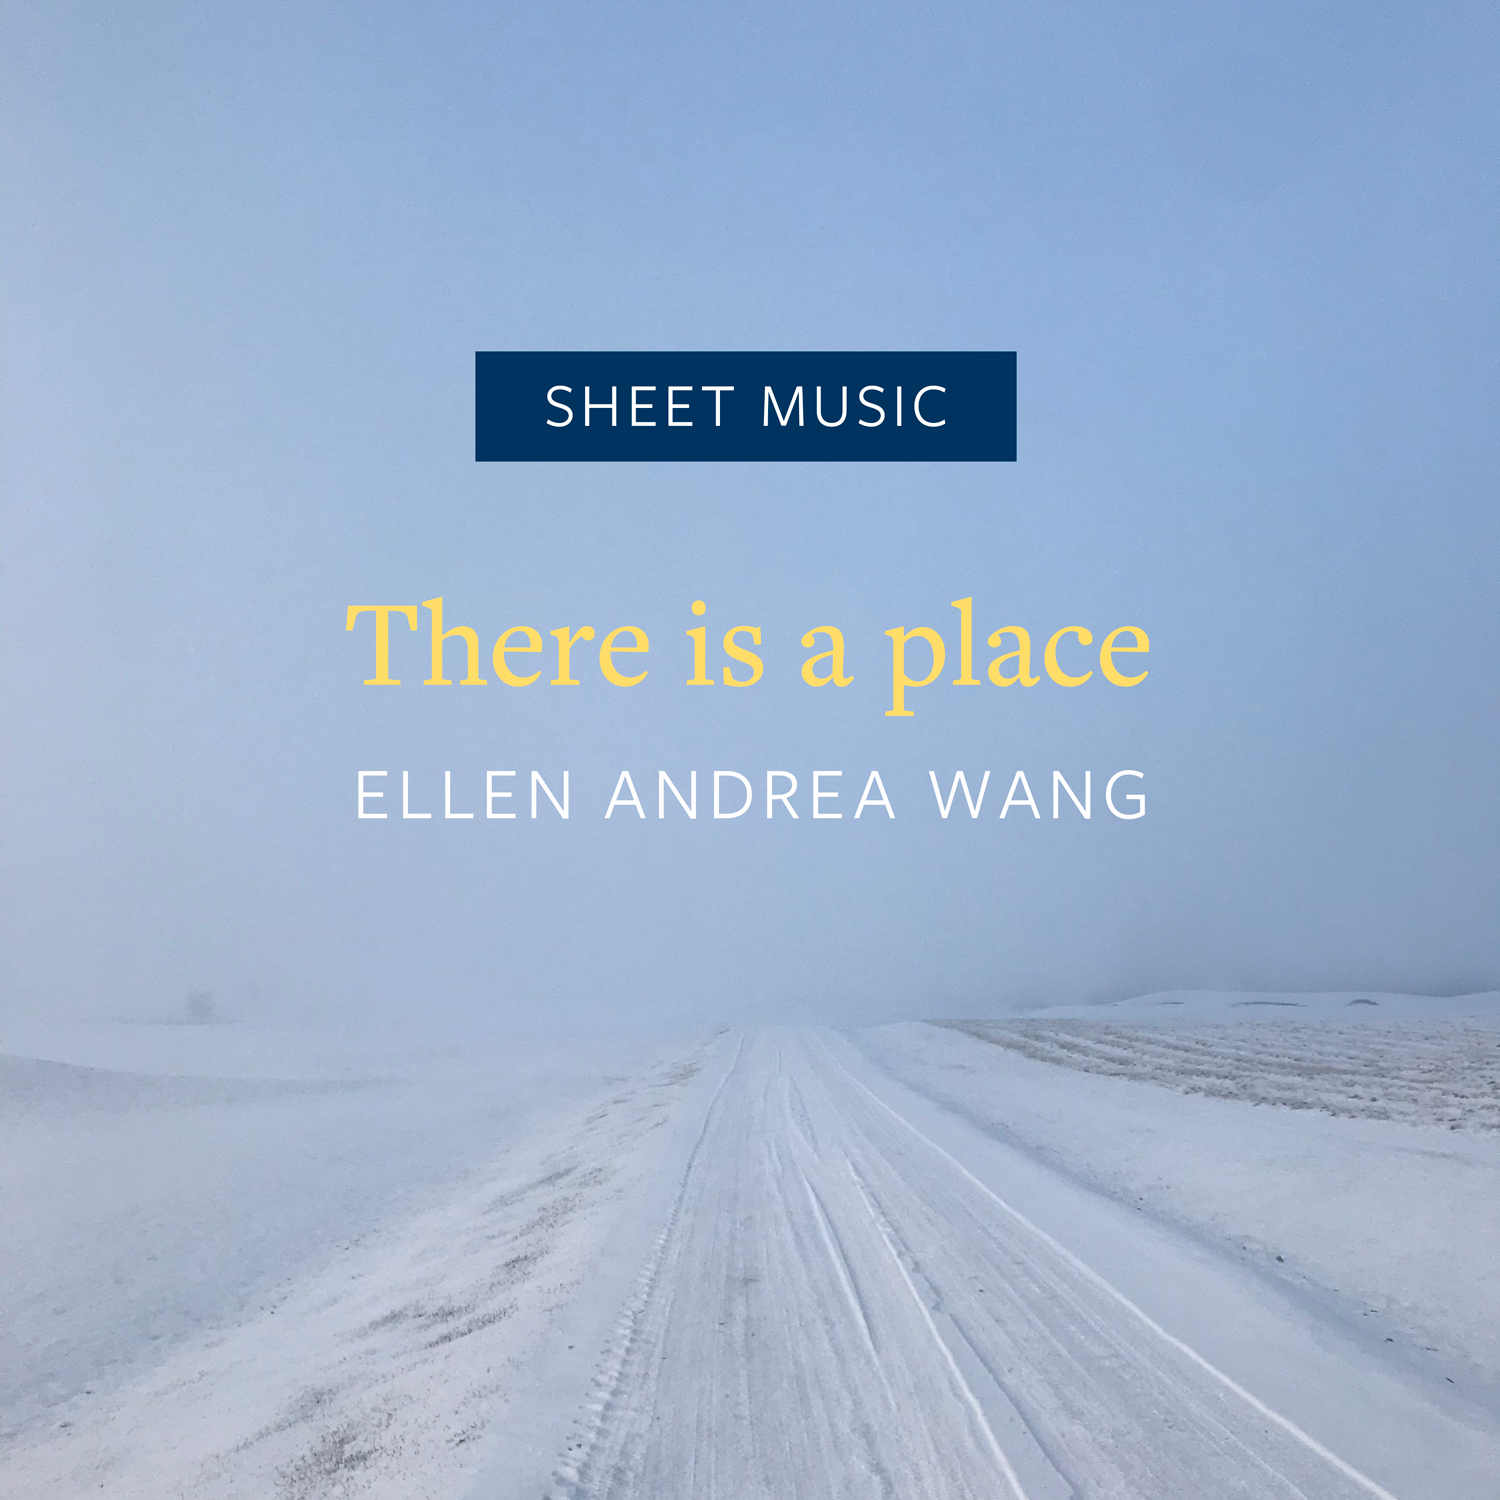 There is a place – Sheet music